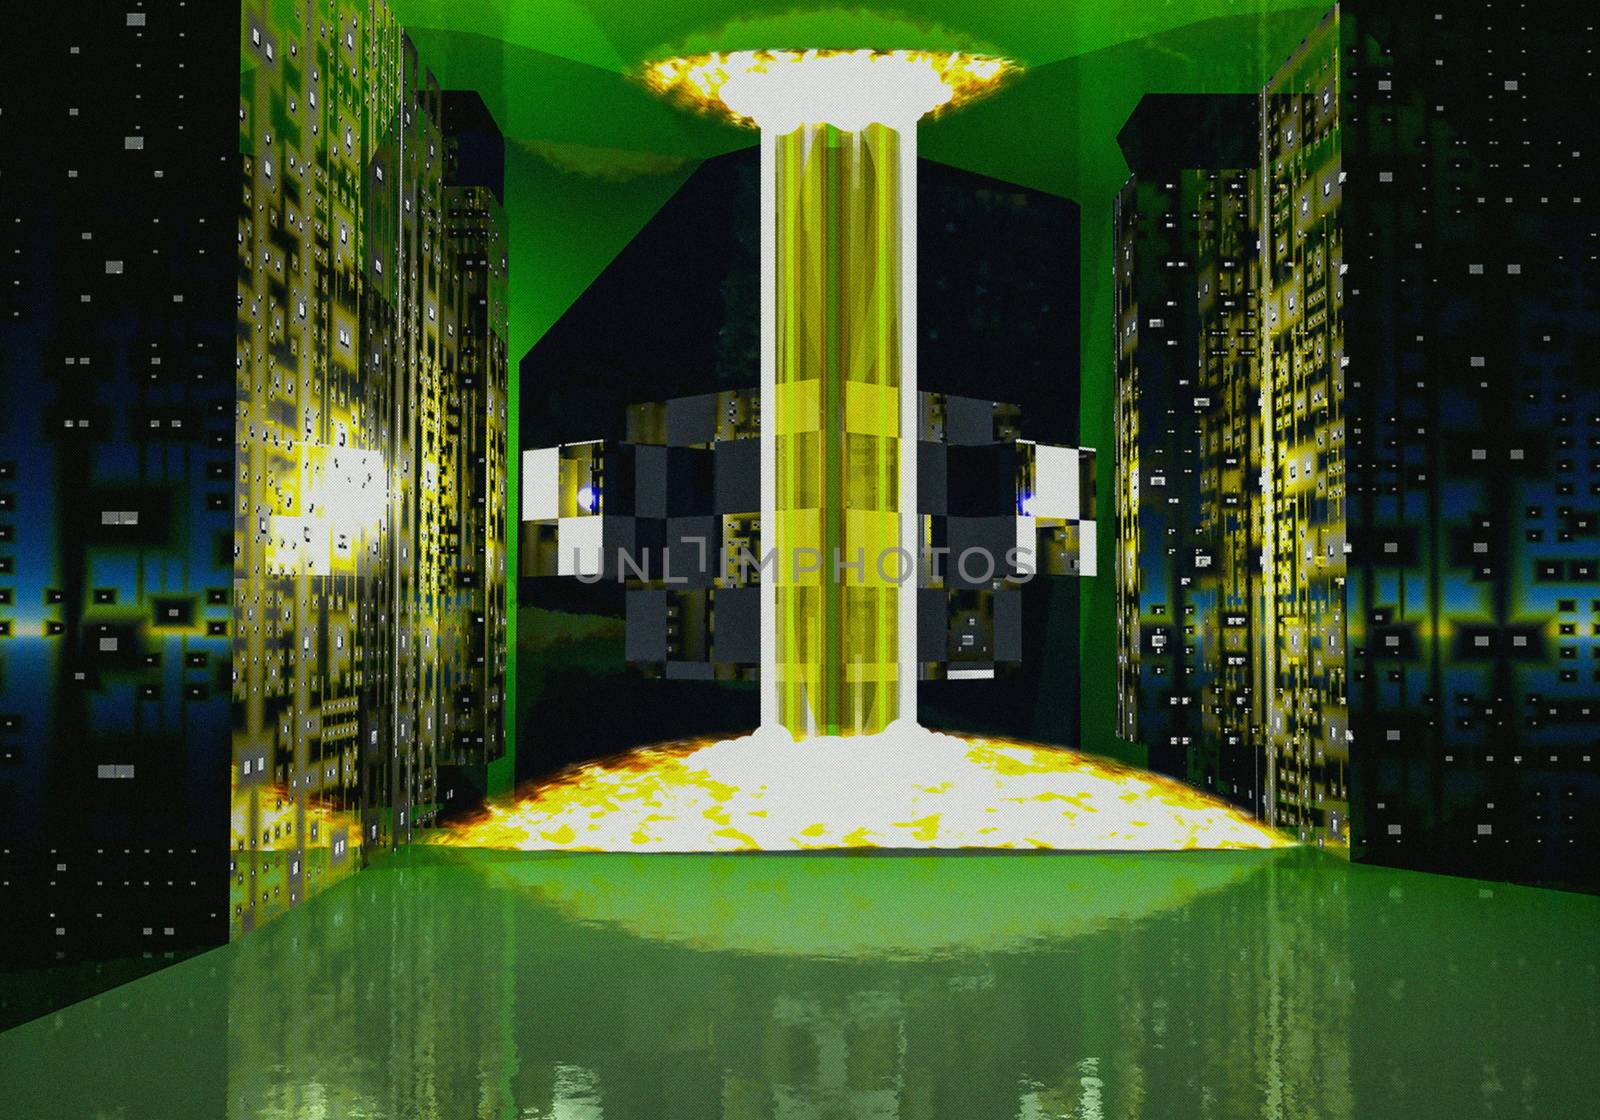 3d abstract textured image of the nuclear fusion experiment scene, controlled by a supercomputer